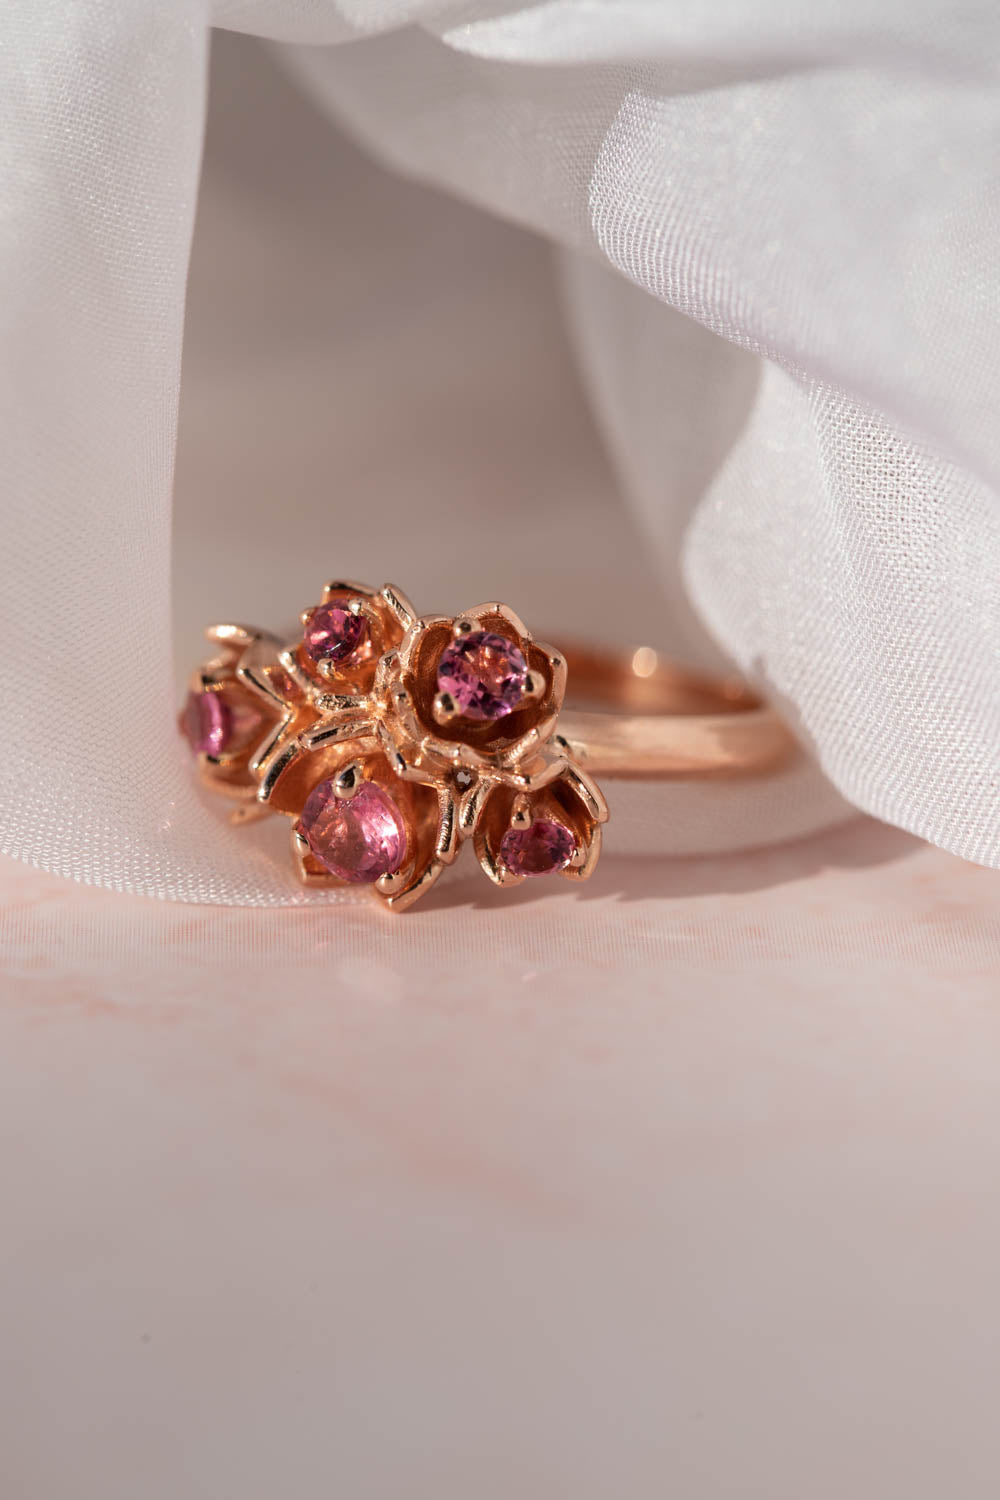 READY TO SHIP: Lily of the valley in 14K rose gold, natural pink tourmalines, RING SIZE 6 US - Eden Garden Jewelry™